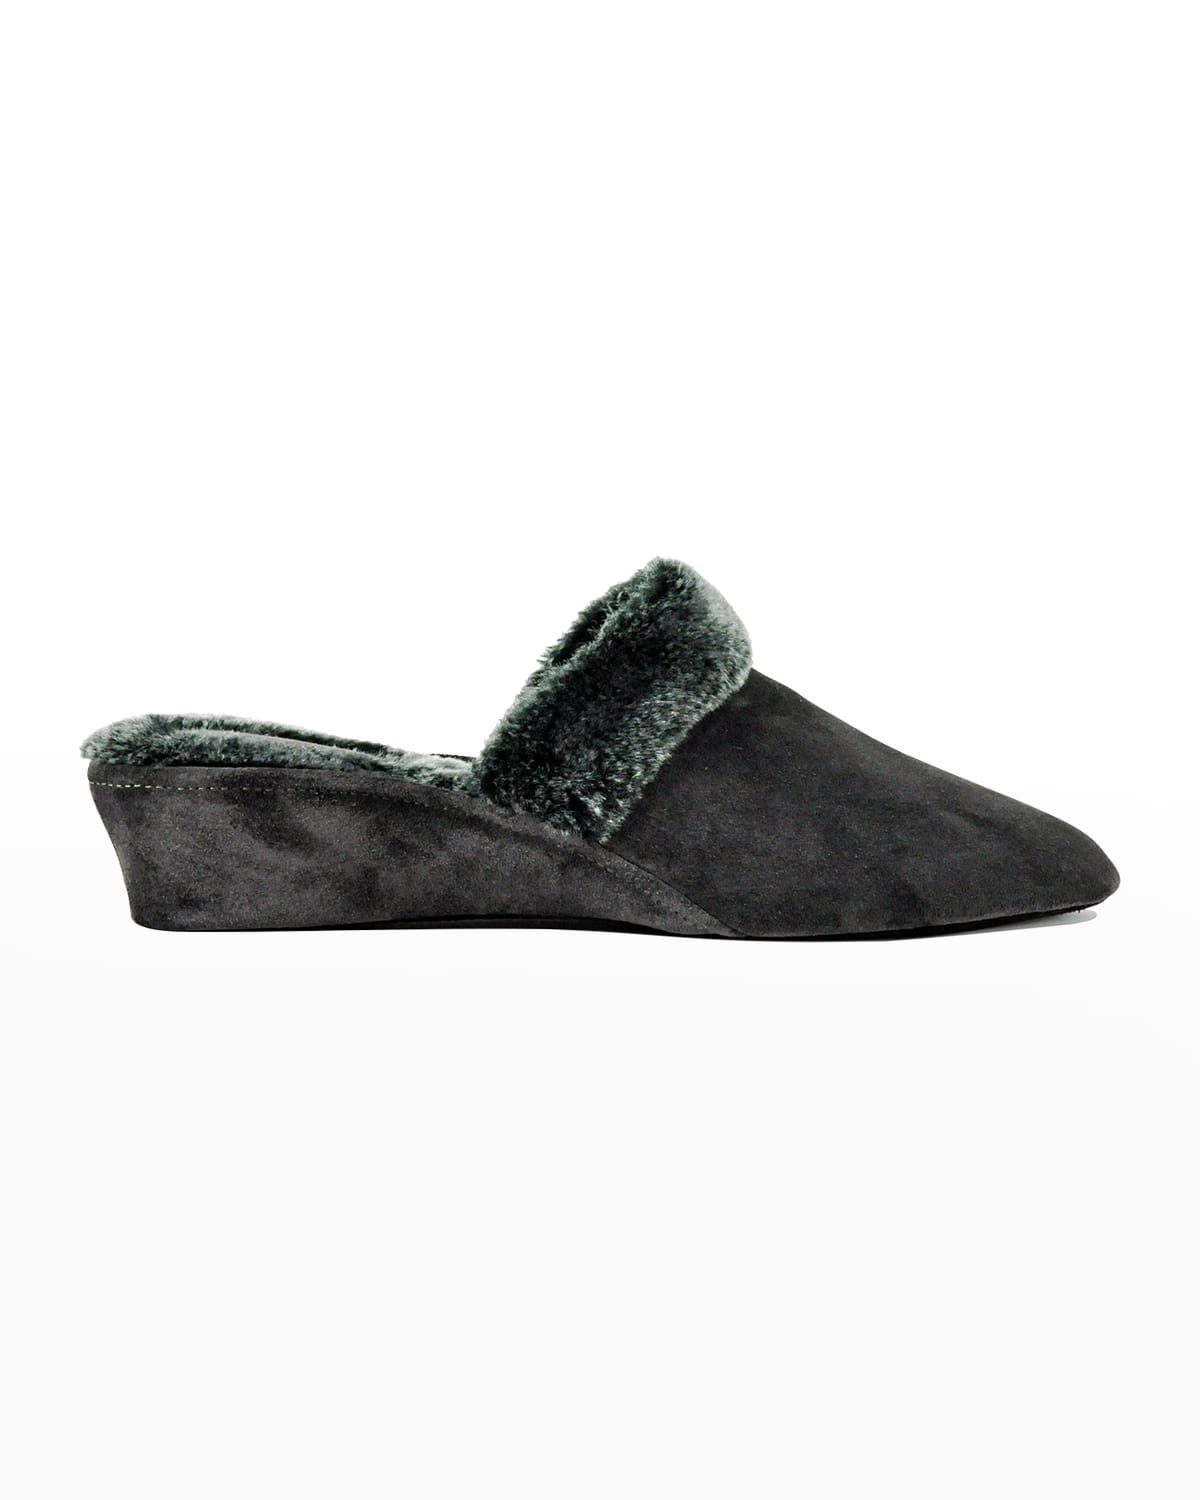 Jacques Levine Suede & Faux Shearling Slippers